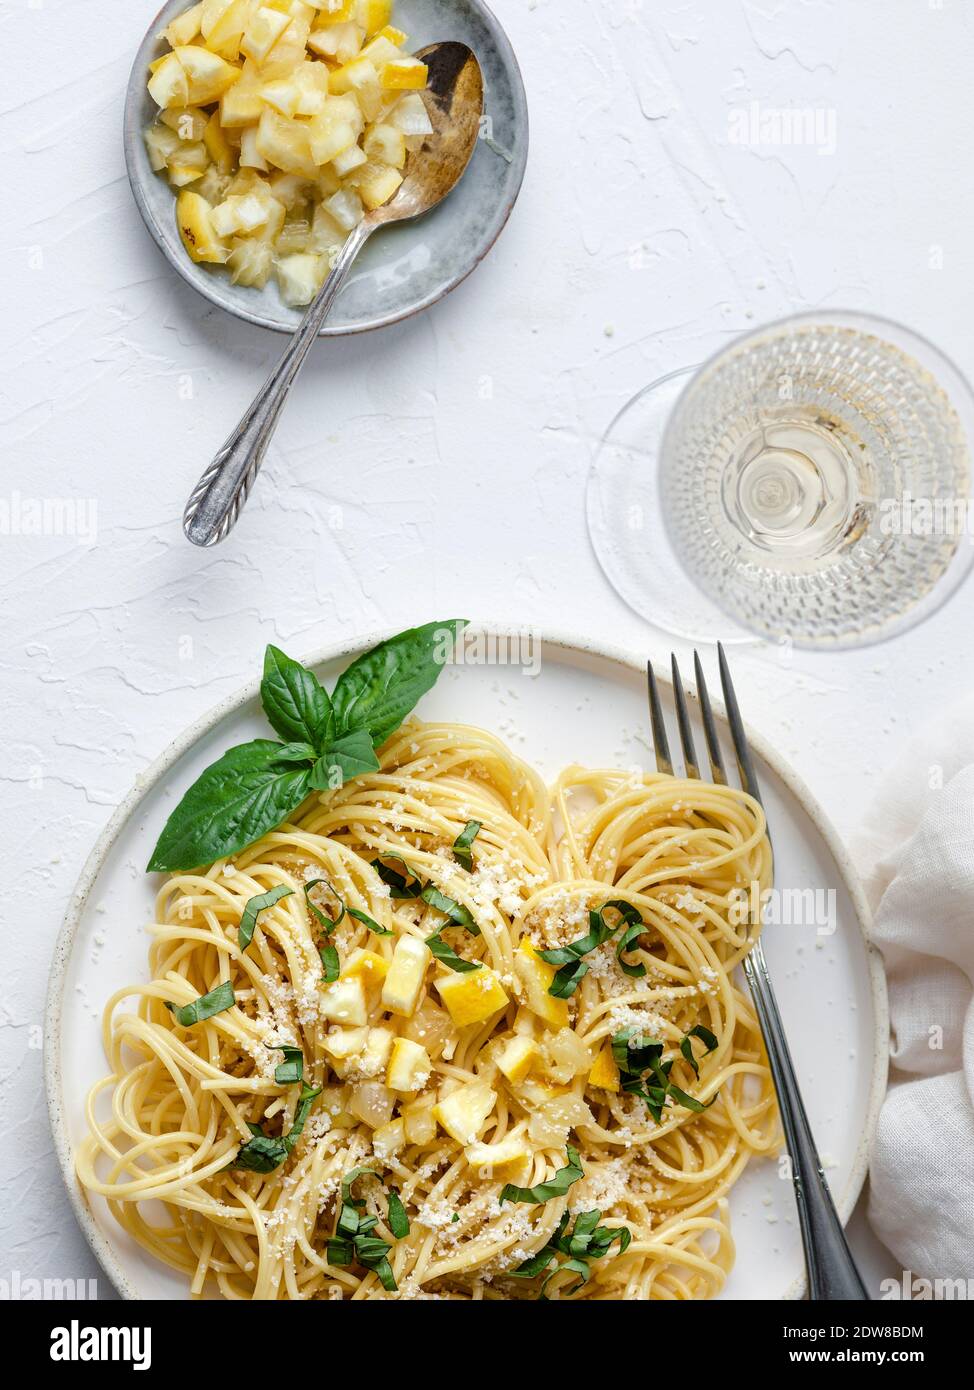 Pasta with preserved lemons Stock Photo